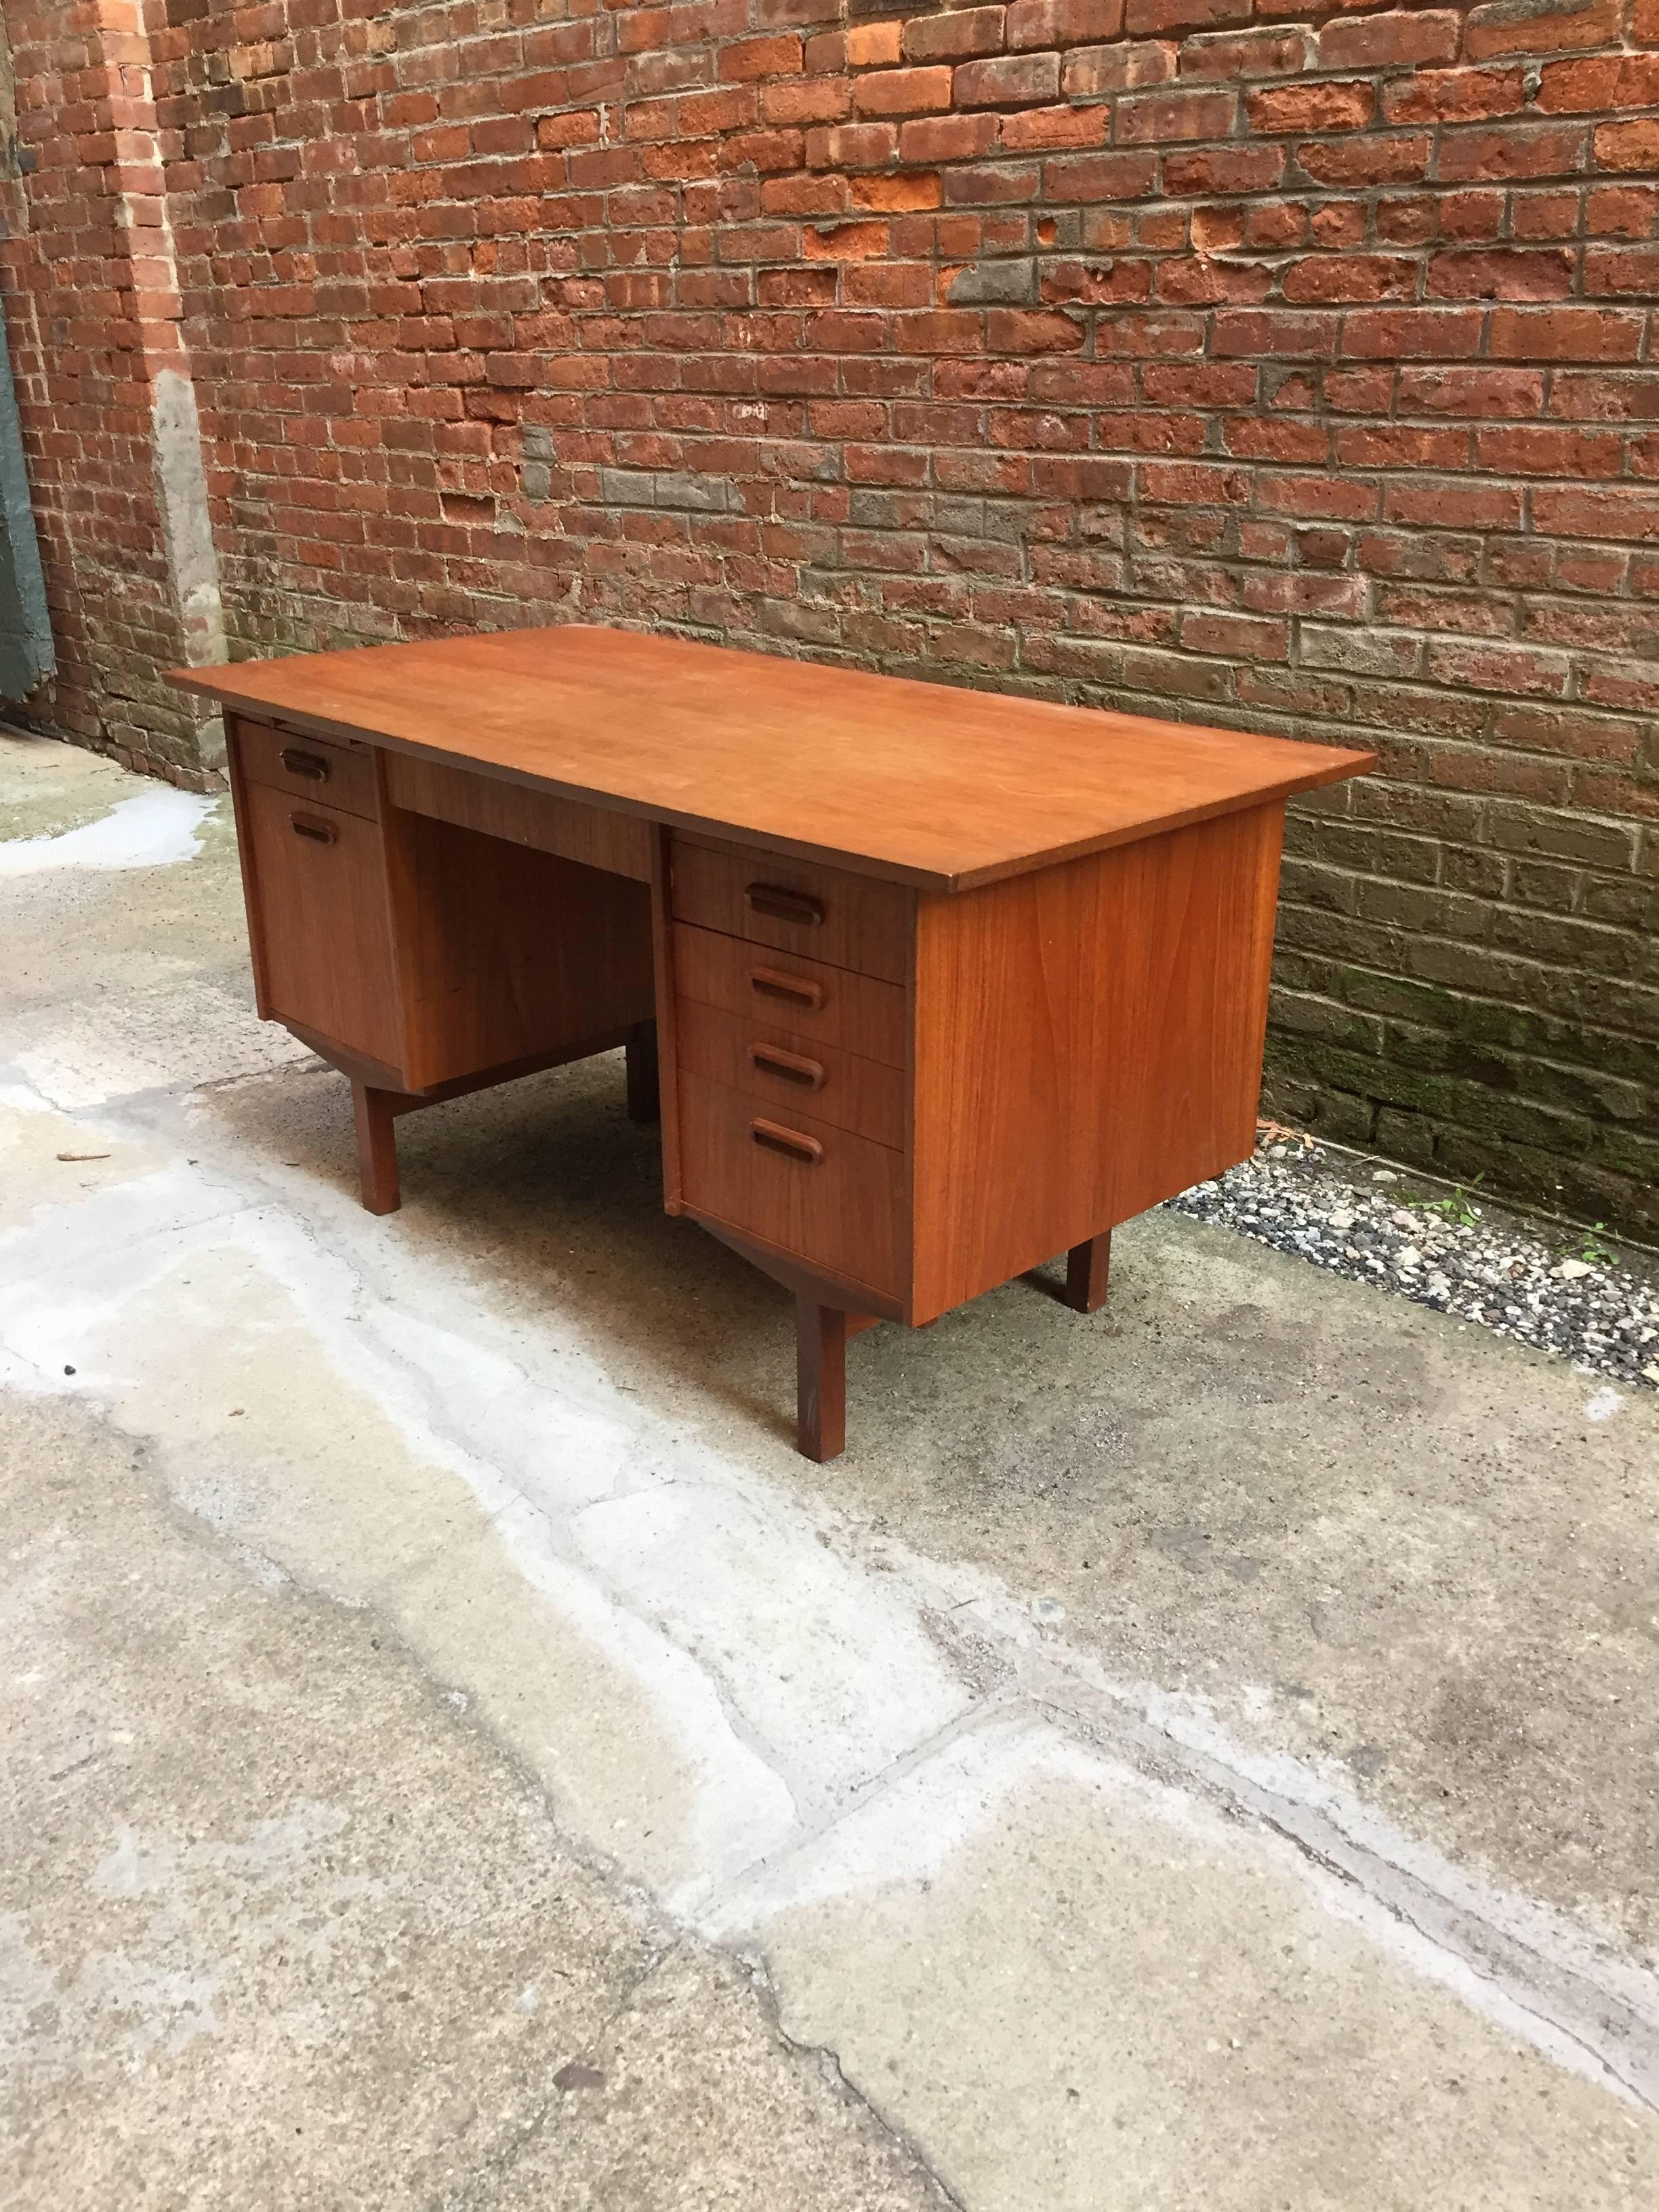 Beautiful seven-drawer teak Danish desk. Finished on all sides and has to pull out surfaces. The left hand side of the desk contains a top drawer with small dividers and the larger bottom drawer is for hanging files. Very nice original condition,